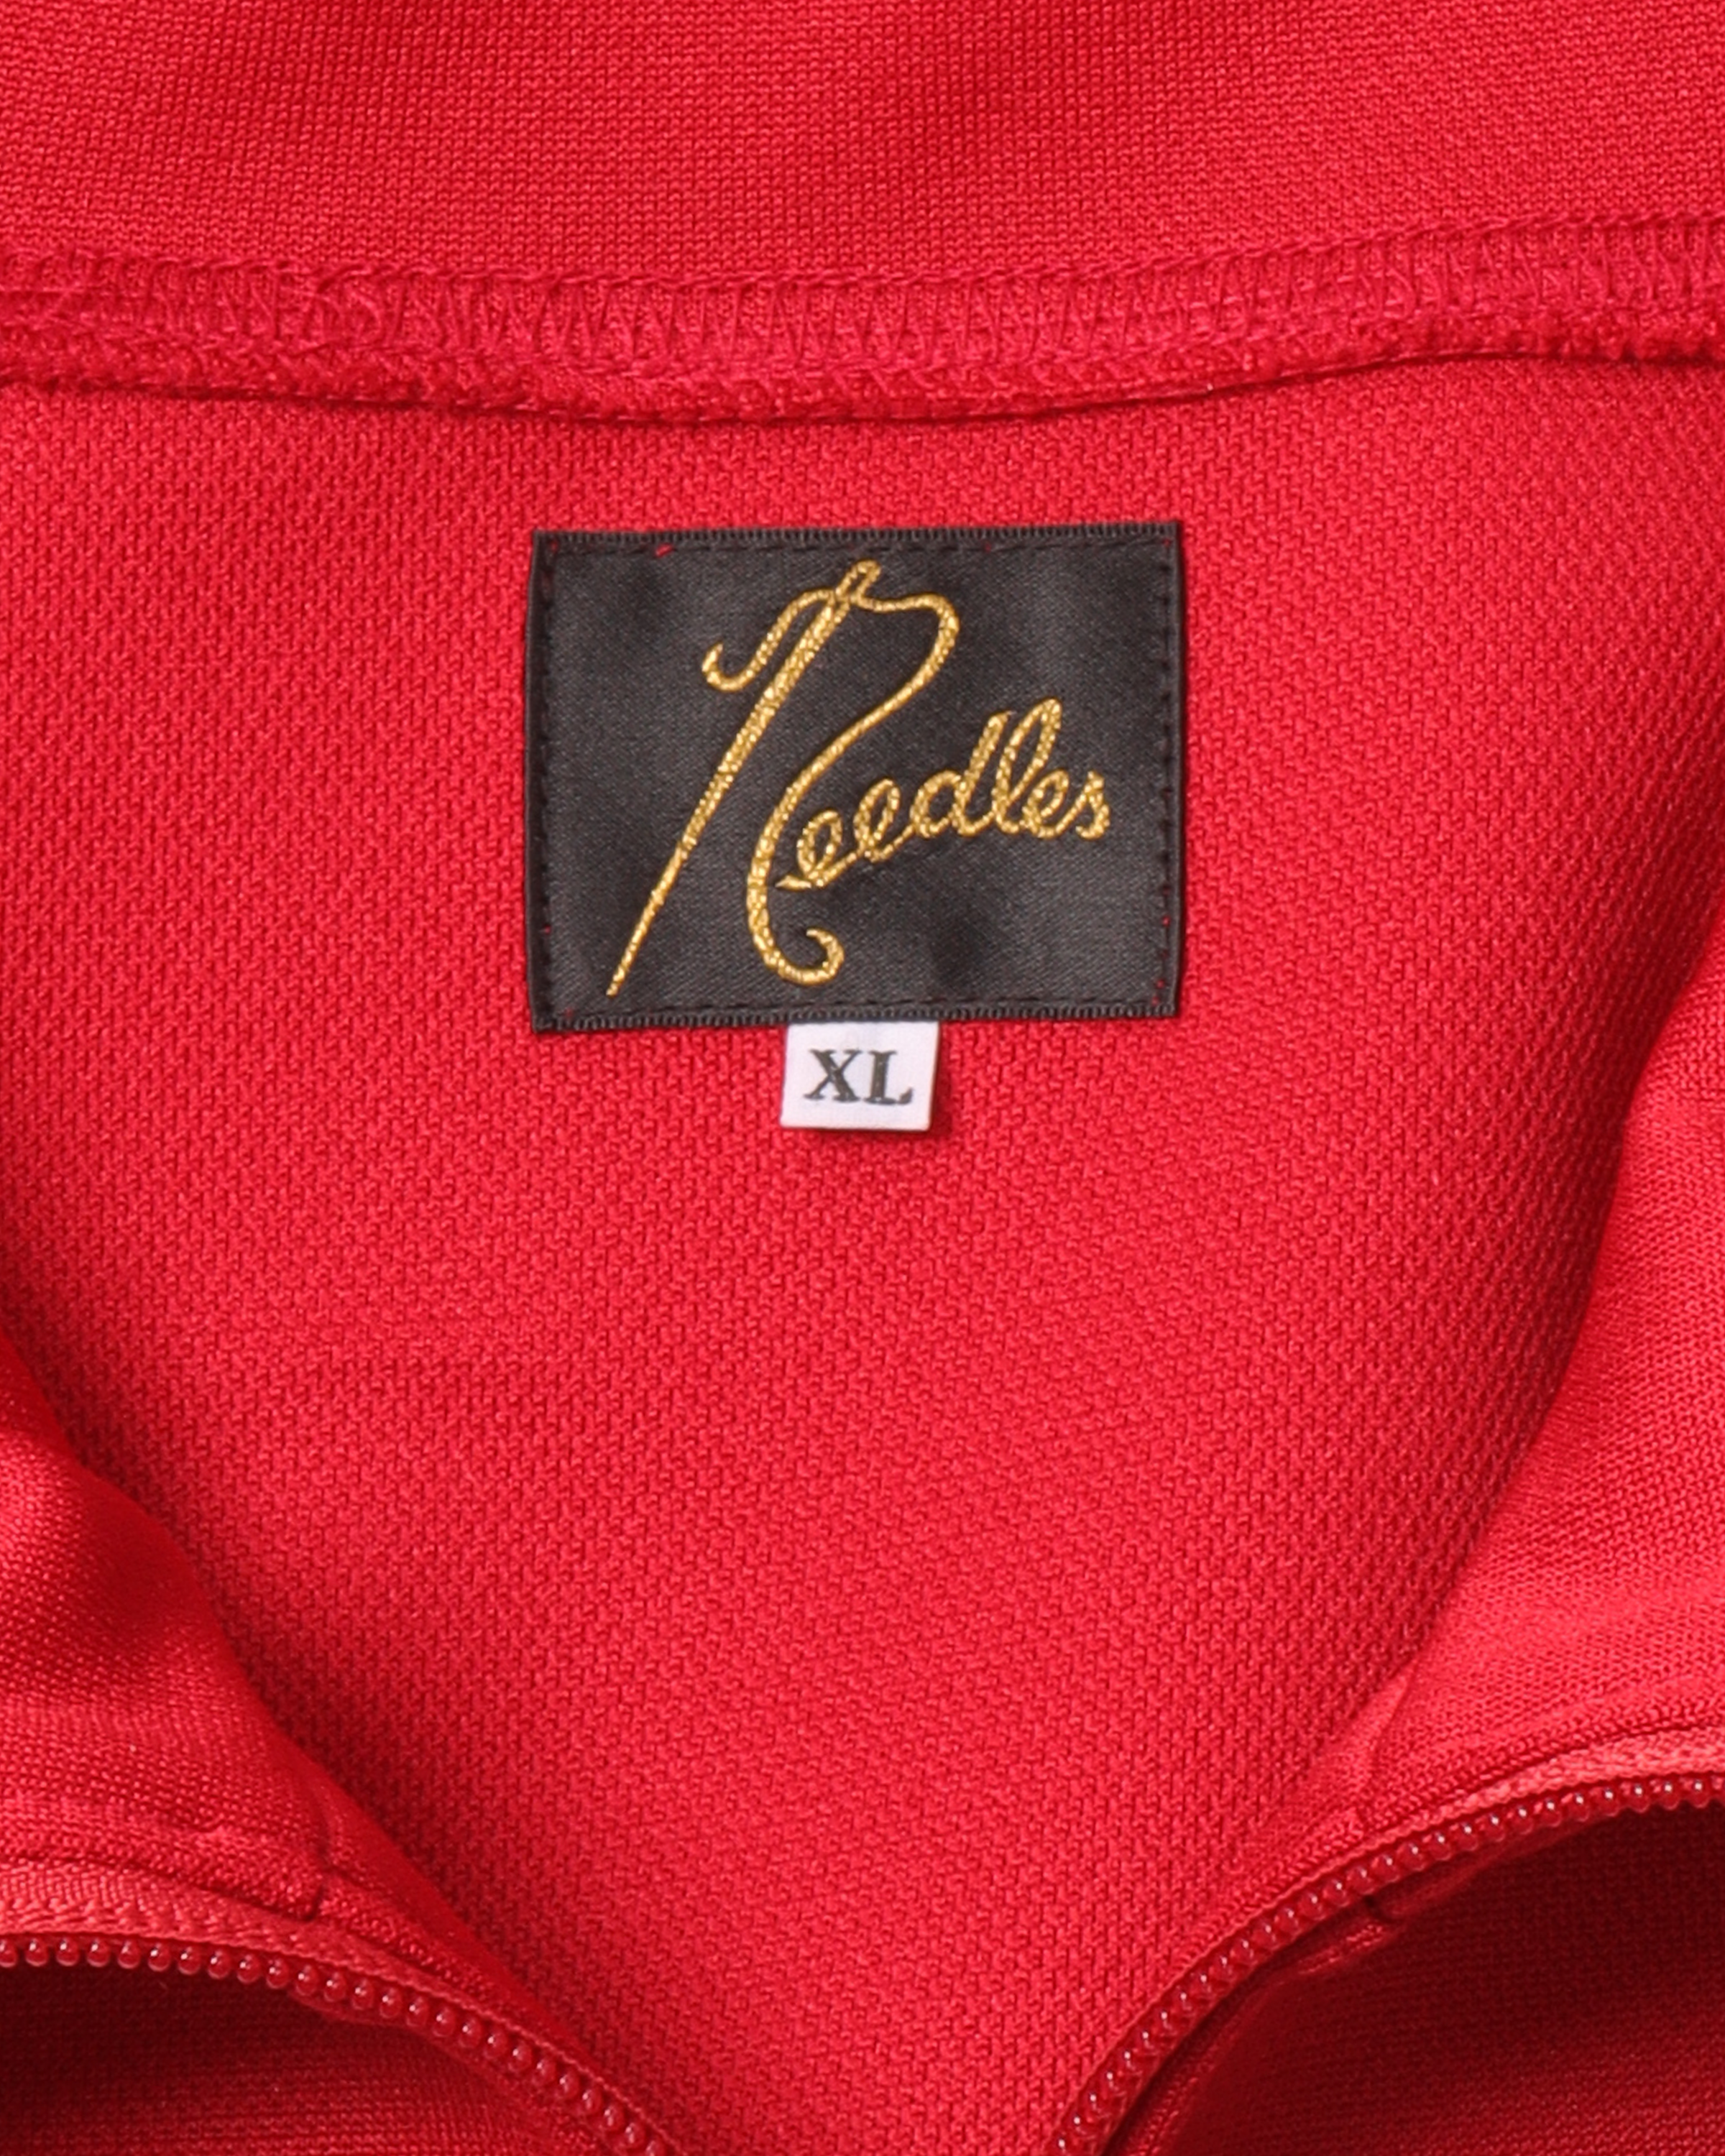 Red Track Suit Top